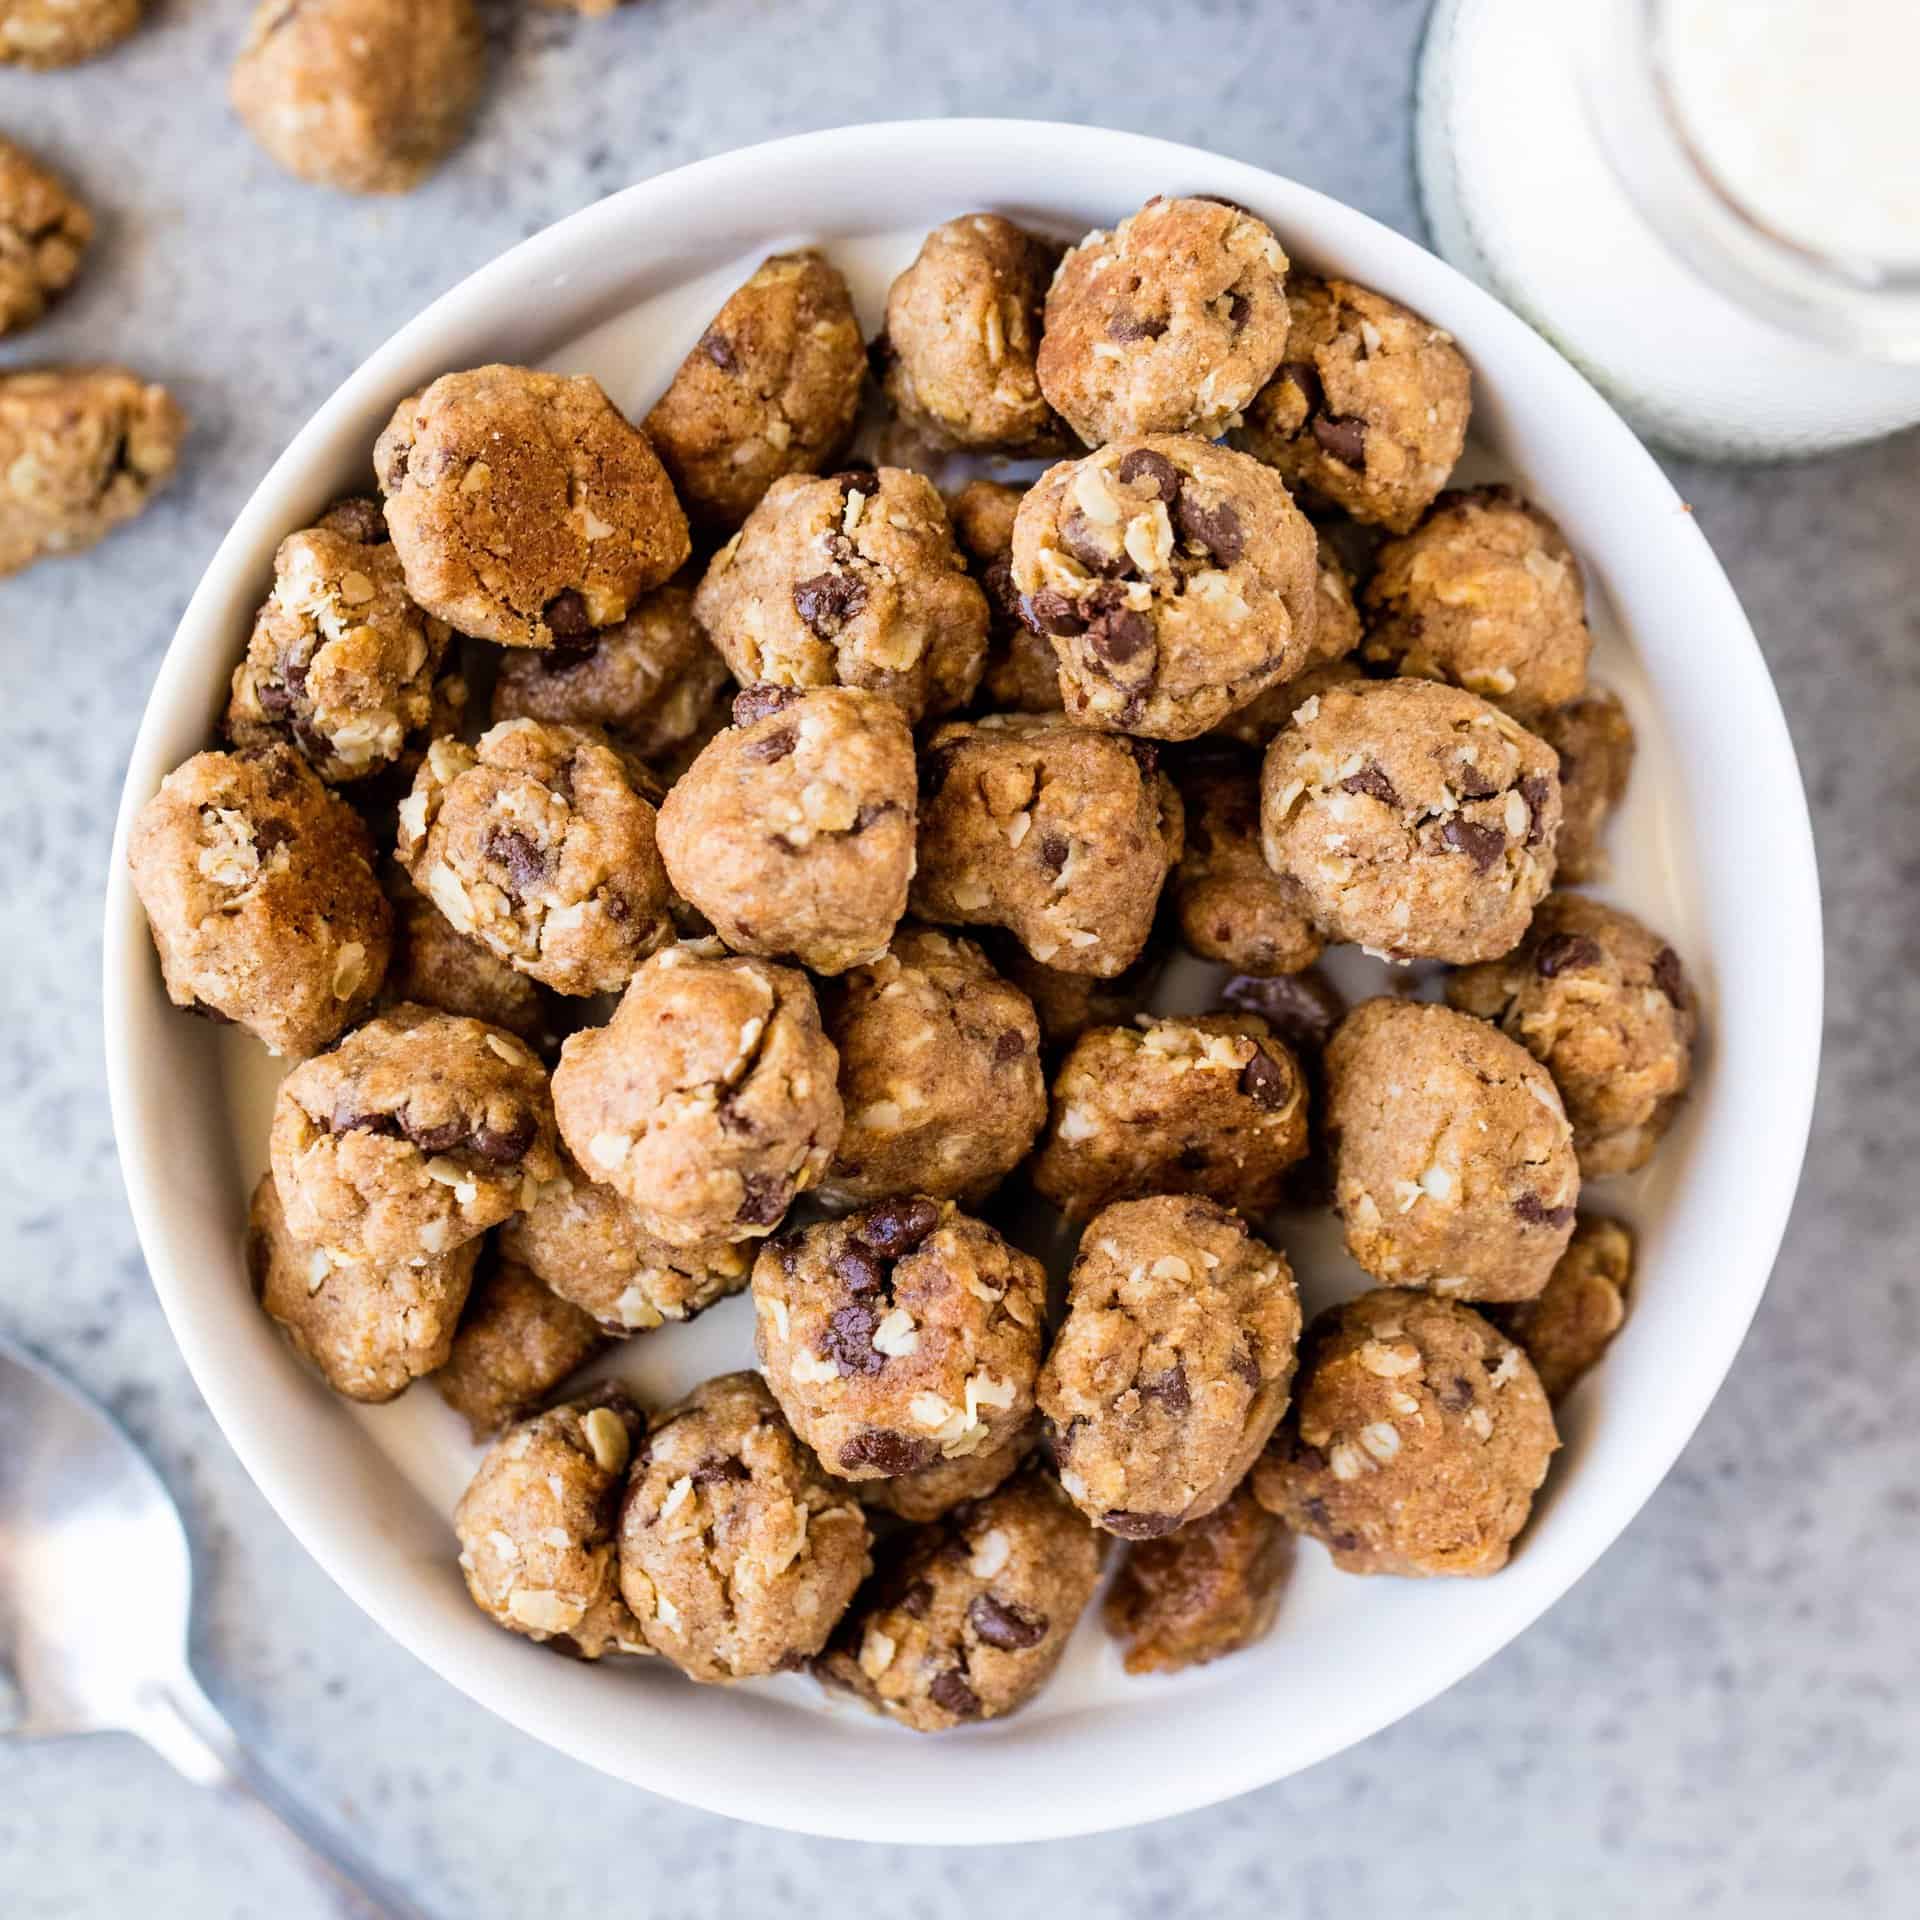 Make your own Homemade Cookie Cereal that's healthy, hearty, and super tasty! Your family will feel so spoiled when you present them with homemade cereal and it's easier than you might think!